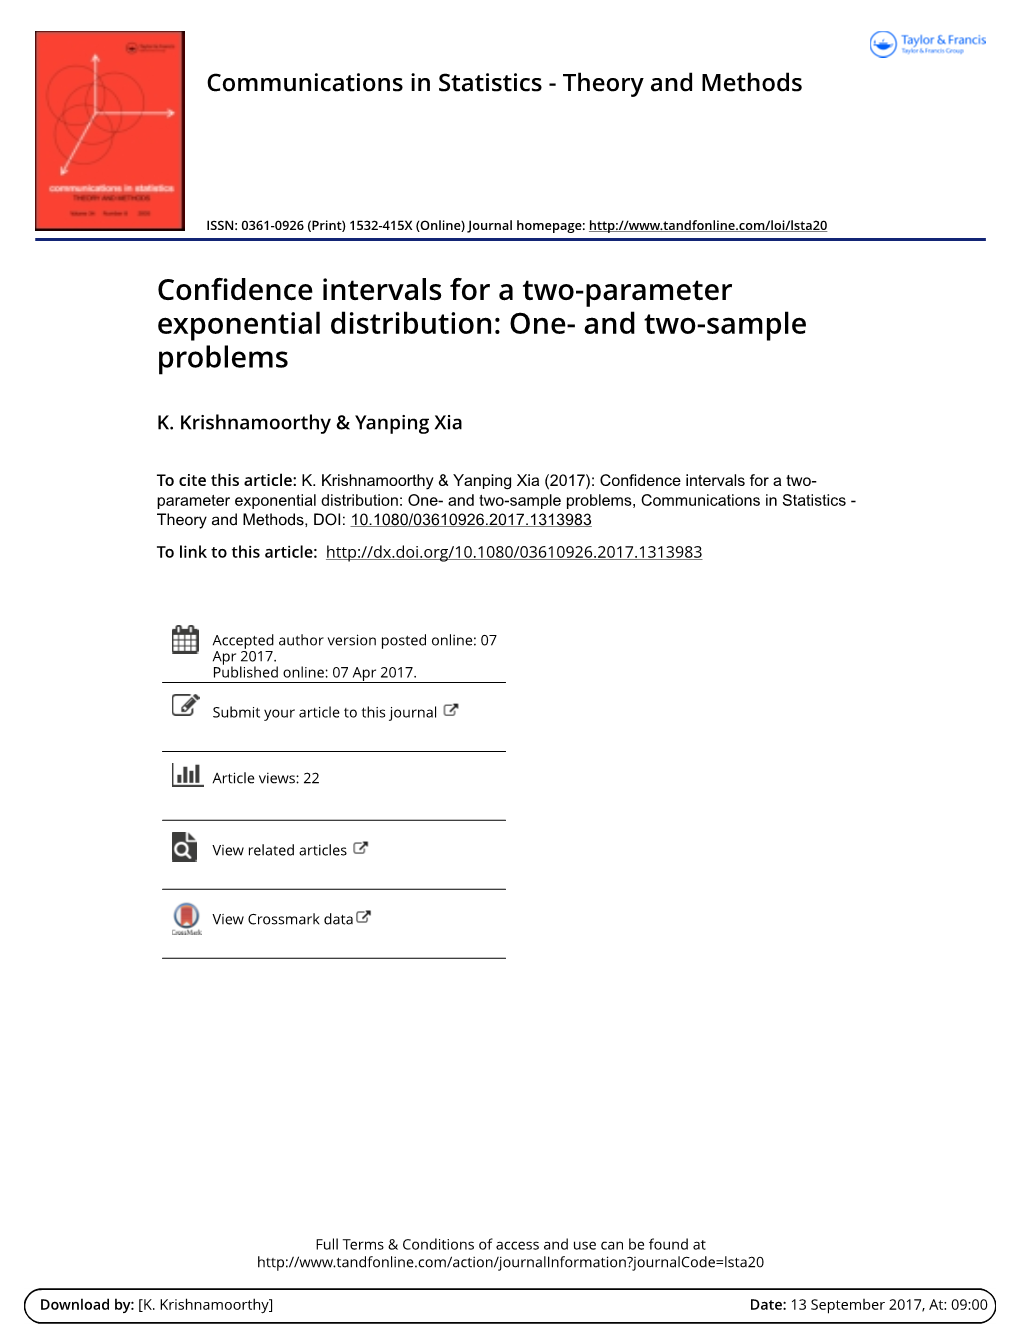 Confidence Intervals for a Two-Parameter Exponential Distribution: One- and Two-Sample Problems